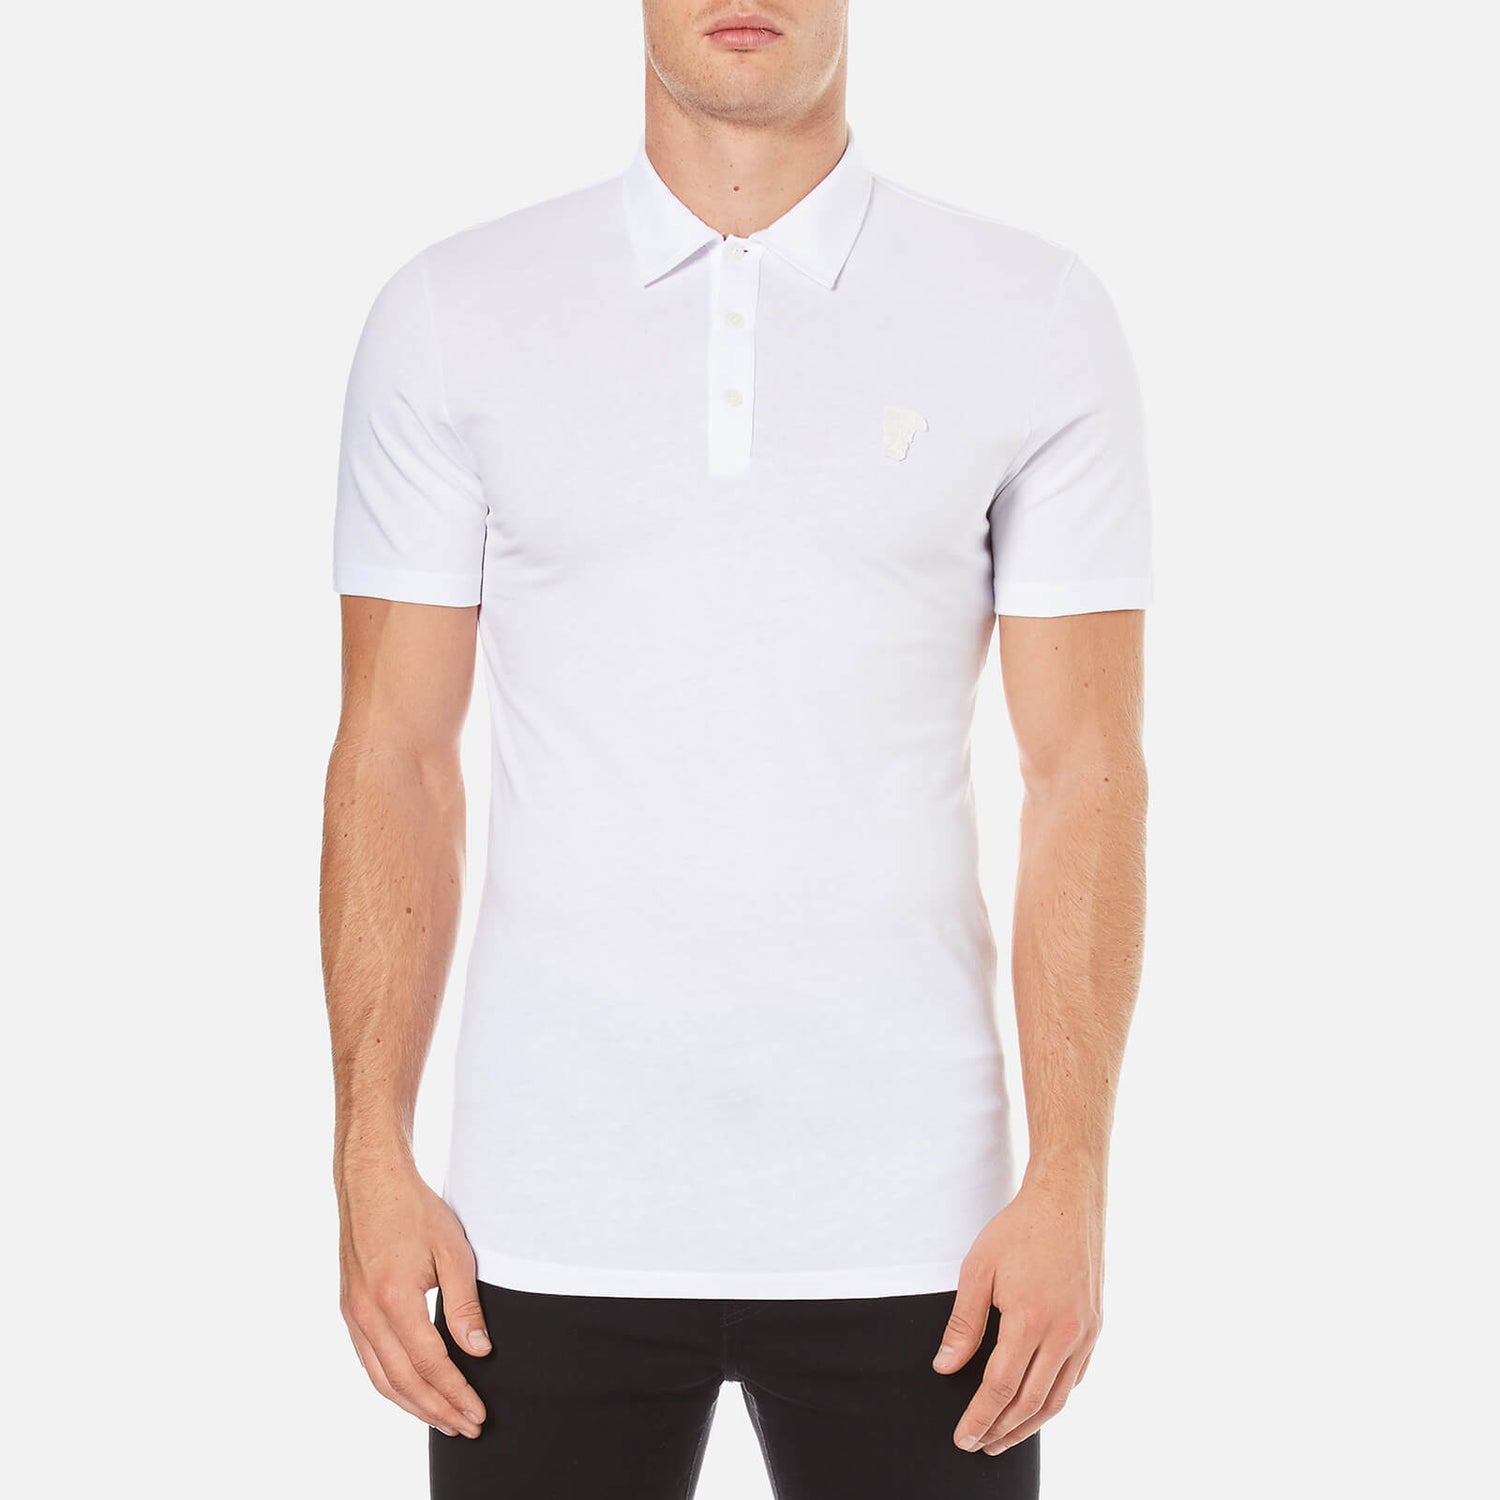 Versace Collection Men's Polo Shirt - White - Free UK Delivery Available